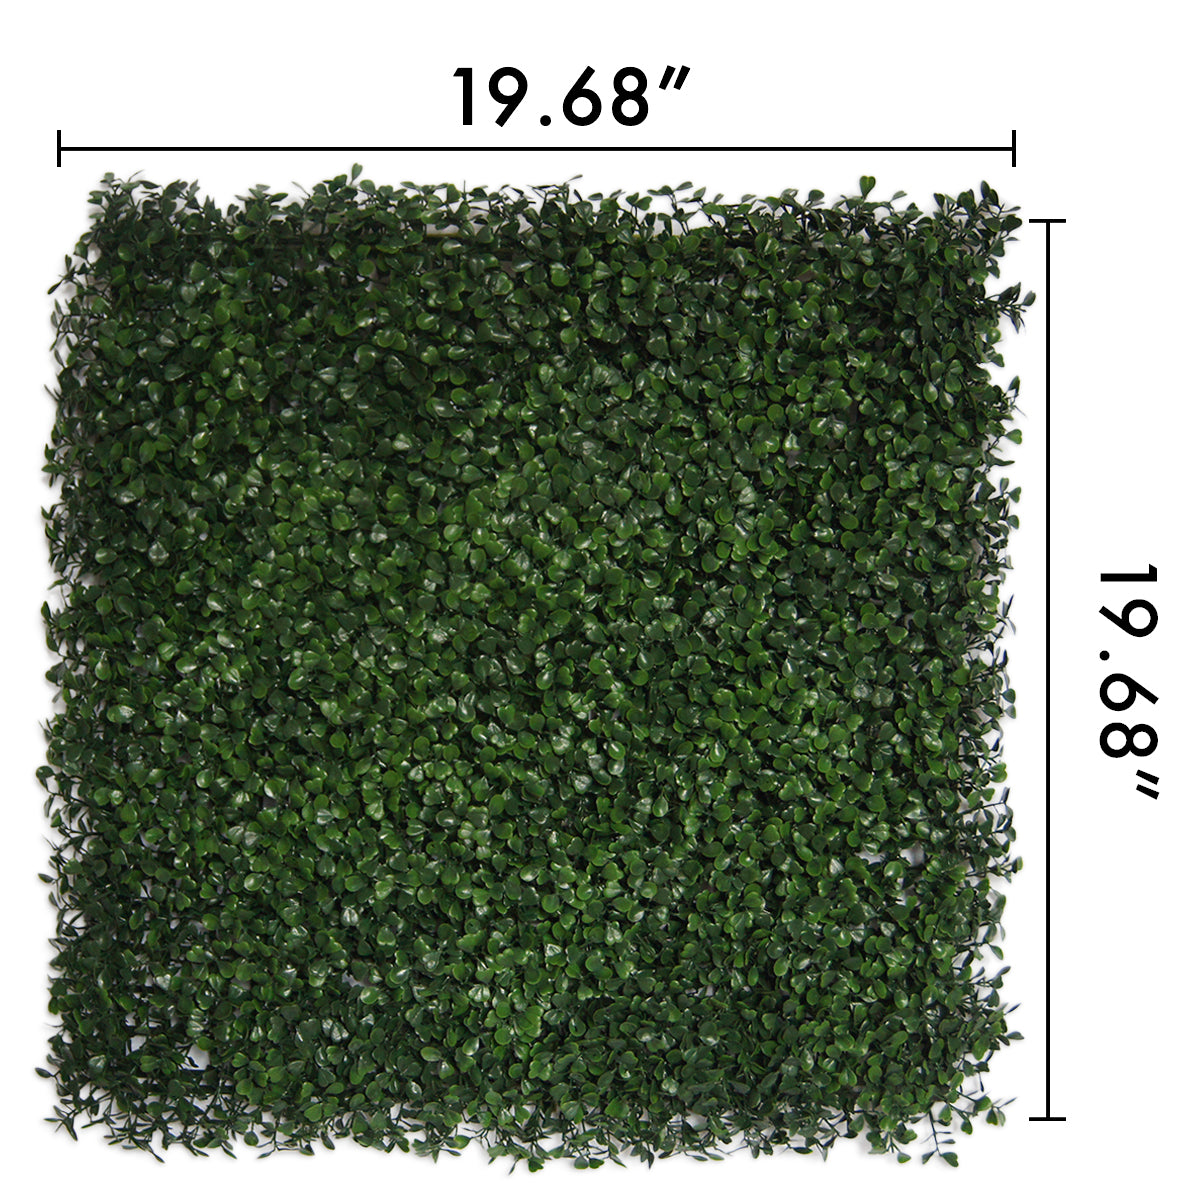 1.5 ft. H x 1.5 ft. W Artificial Ficus Fence Panel (Set of 12)